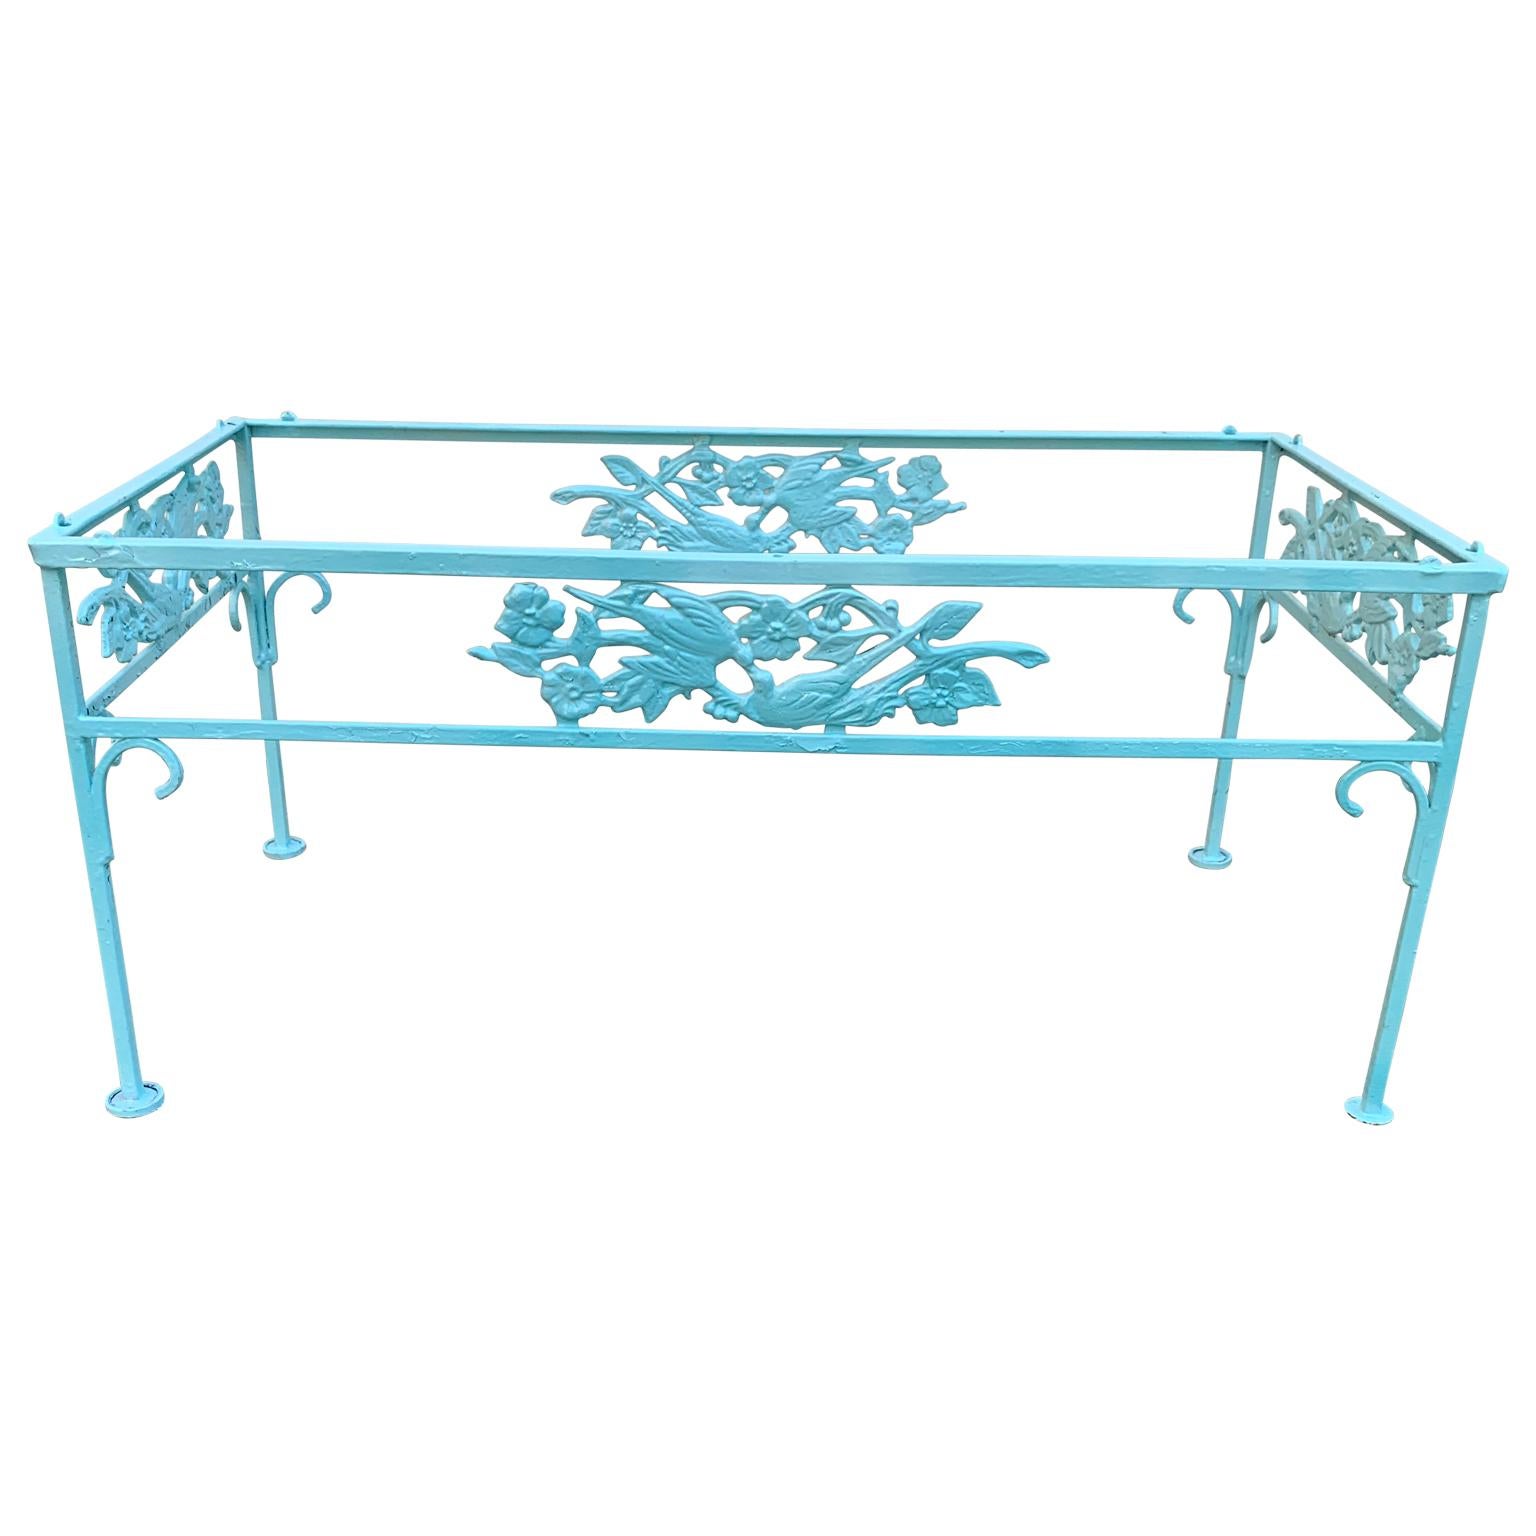 Victorian Set Of Turquoise Painted Iron Garden Table, Sofa, Chaise And Armchair 1